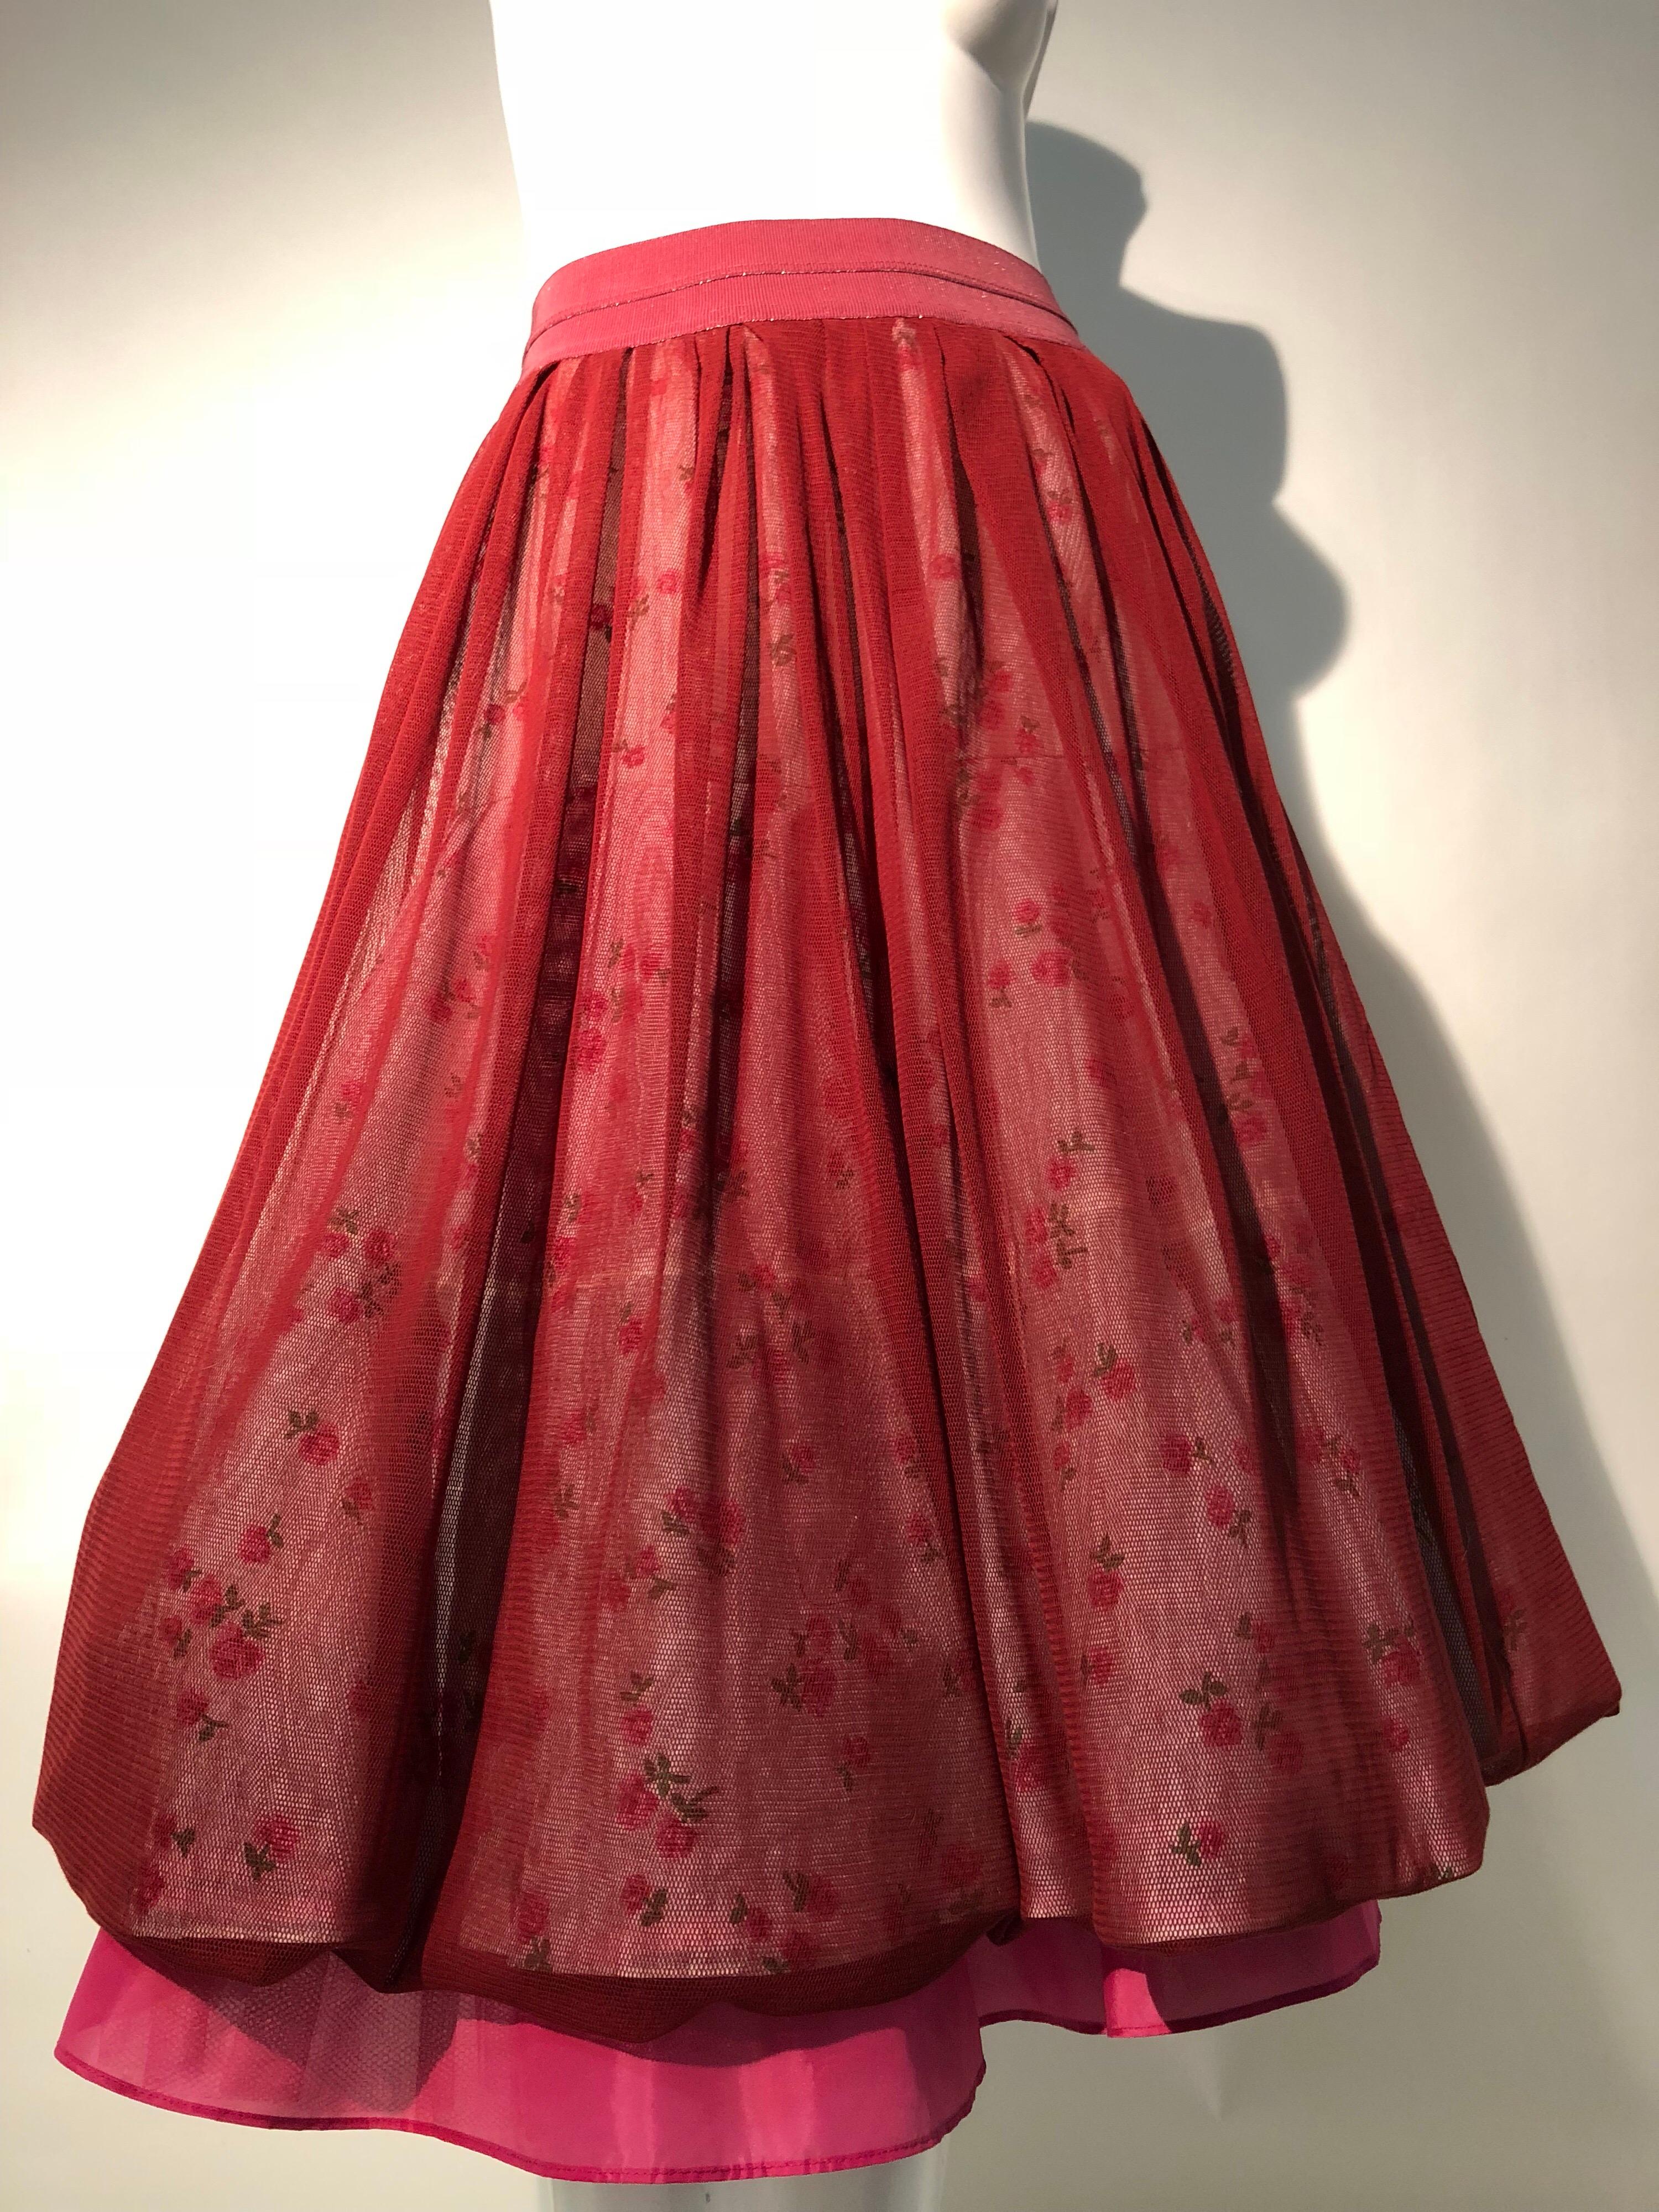 Torso Creations Reconstructed Multi-Layered Petticoat Skirt In Burgundy & Floral 7